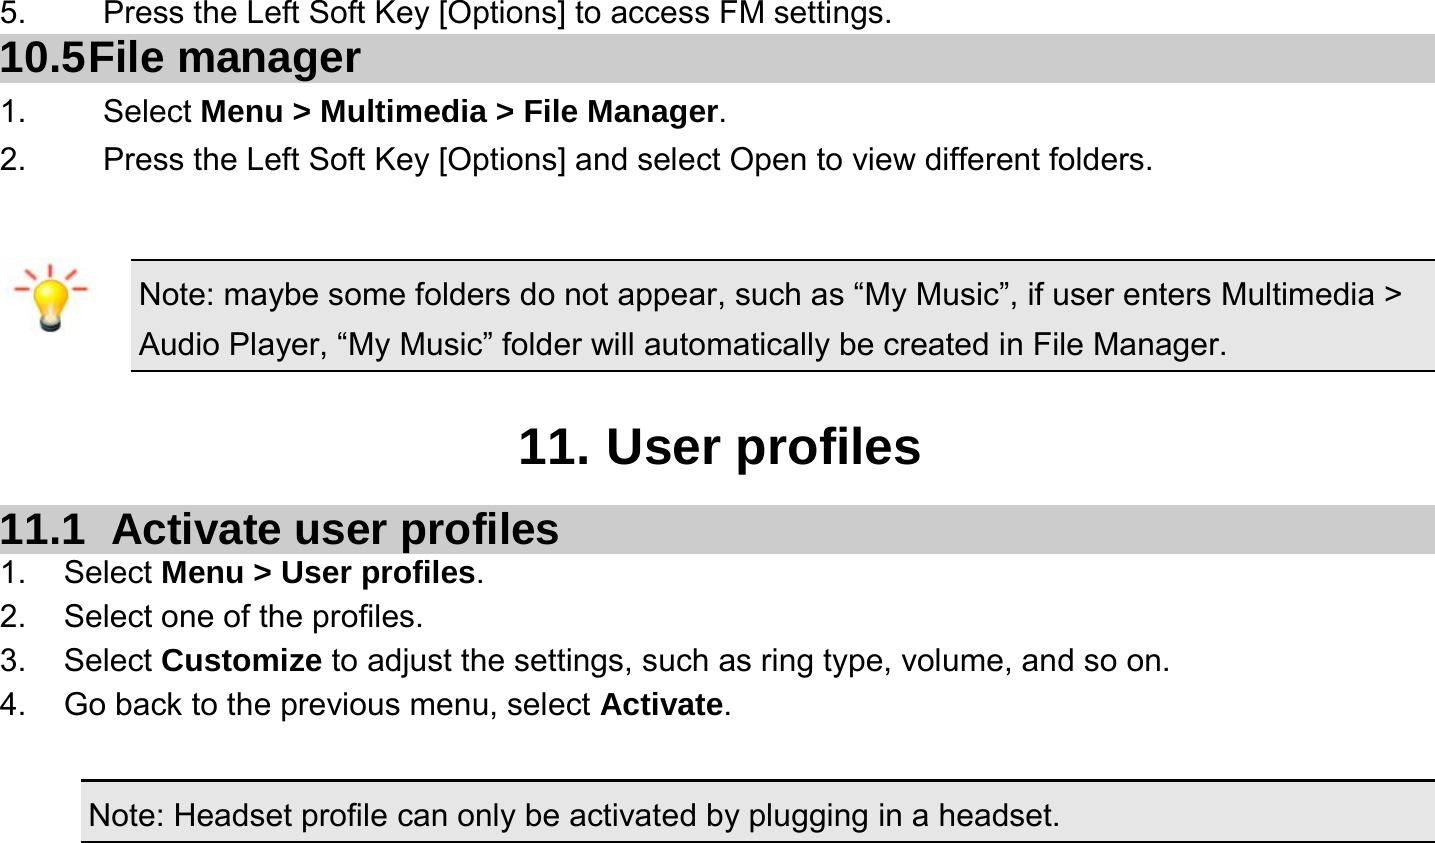  5.    Press the Left Soft Key [Options] to access FM settings. 10.5 File  manager 1. Select Menu &gt; Multimedia &gt; File Manager. 2.  Press the Left Soft Key [Options] and select Open to view different folders.  Note: maybe some folders do not appear, such as “My Music”, if user enters Multimedia &gt; Audio Player, “My Music” folder will automatically be created in File Manager.  11. User profiles 11.1   Activate user profiles 1. Select Menu &gt; User profiles. 2.  Select one of the profiles. 3. Select Customize to adjust the settings, such as ring type, volume, and so on. 4.  Go back to the previous menu, select Activate.  Note: Headset profile can only be activated by plugging in a headset. 